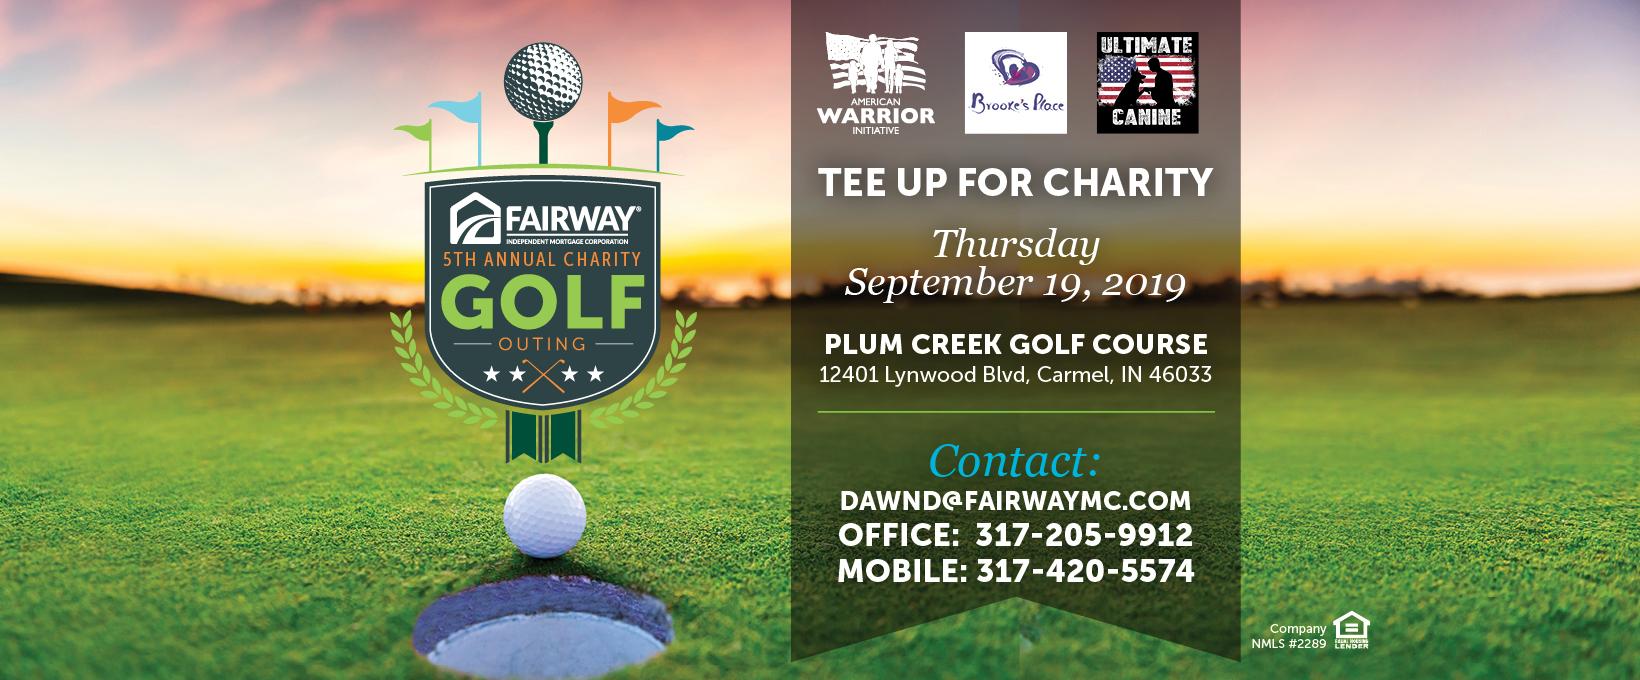 Fairway's 5th Annual Tee Up for Charity Golf Outing